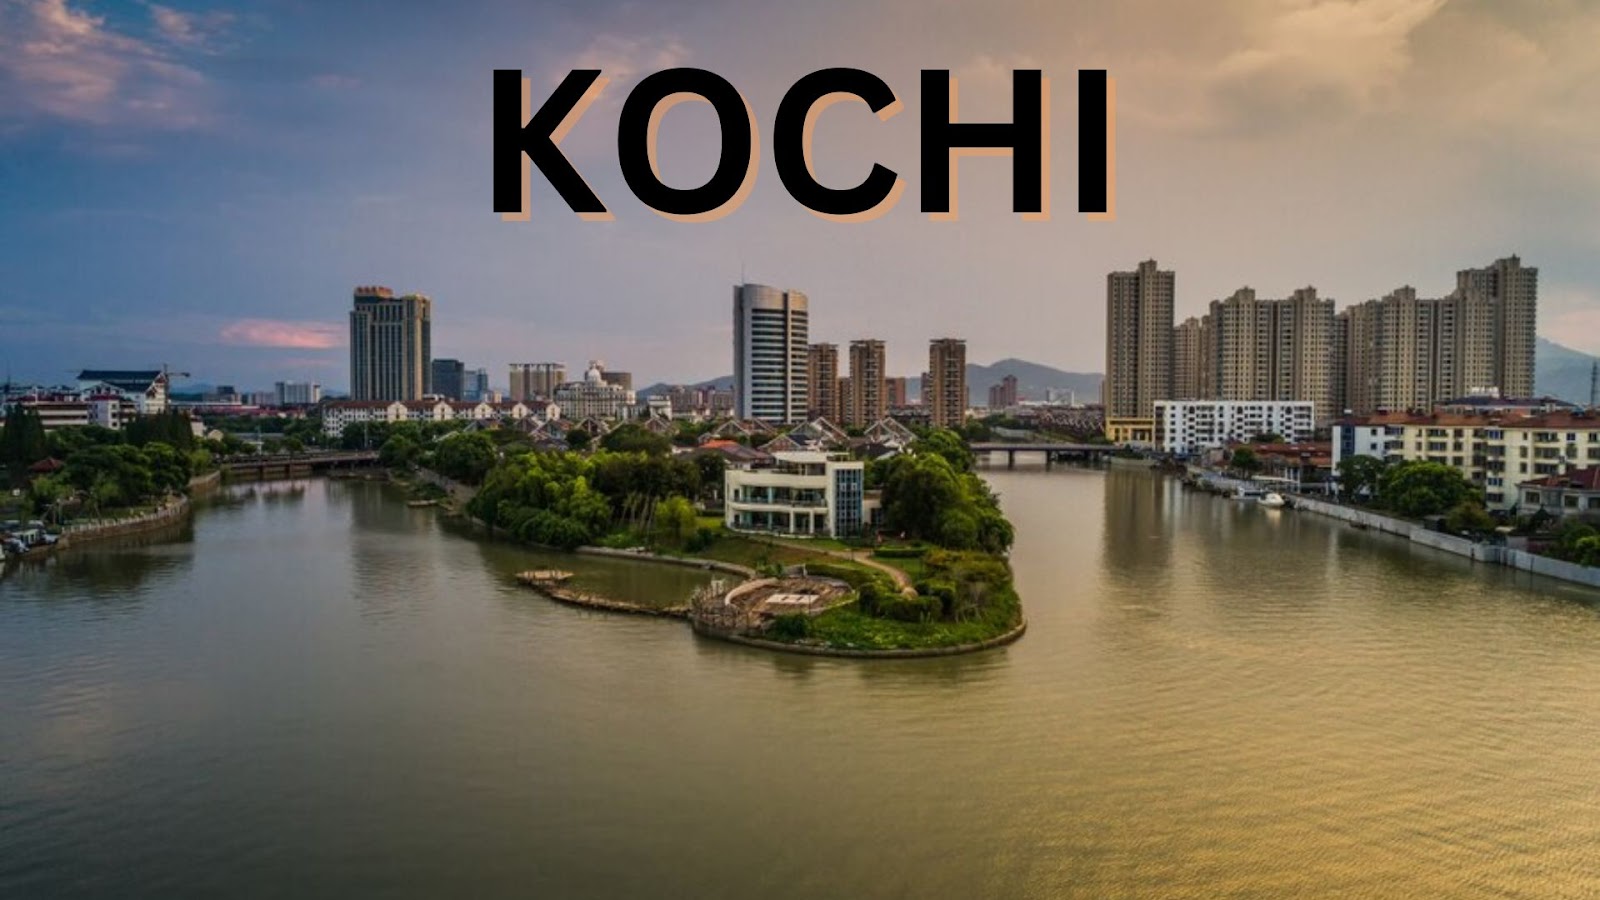 Kochi is known as a seaside city with a lot of greenery with beautiful houses options.